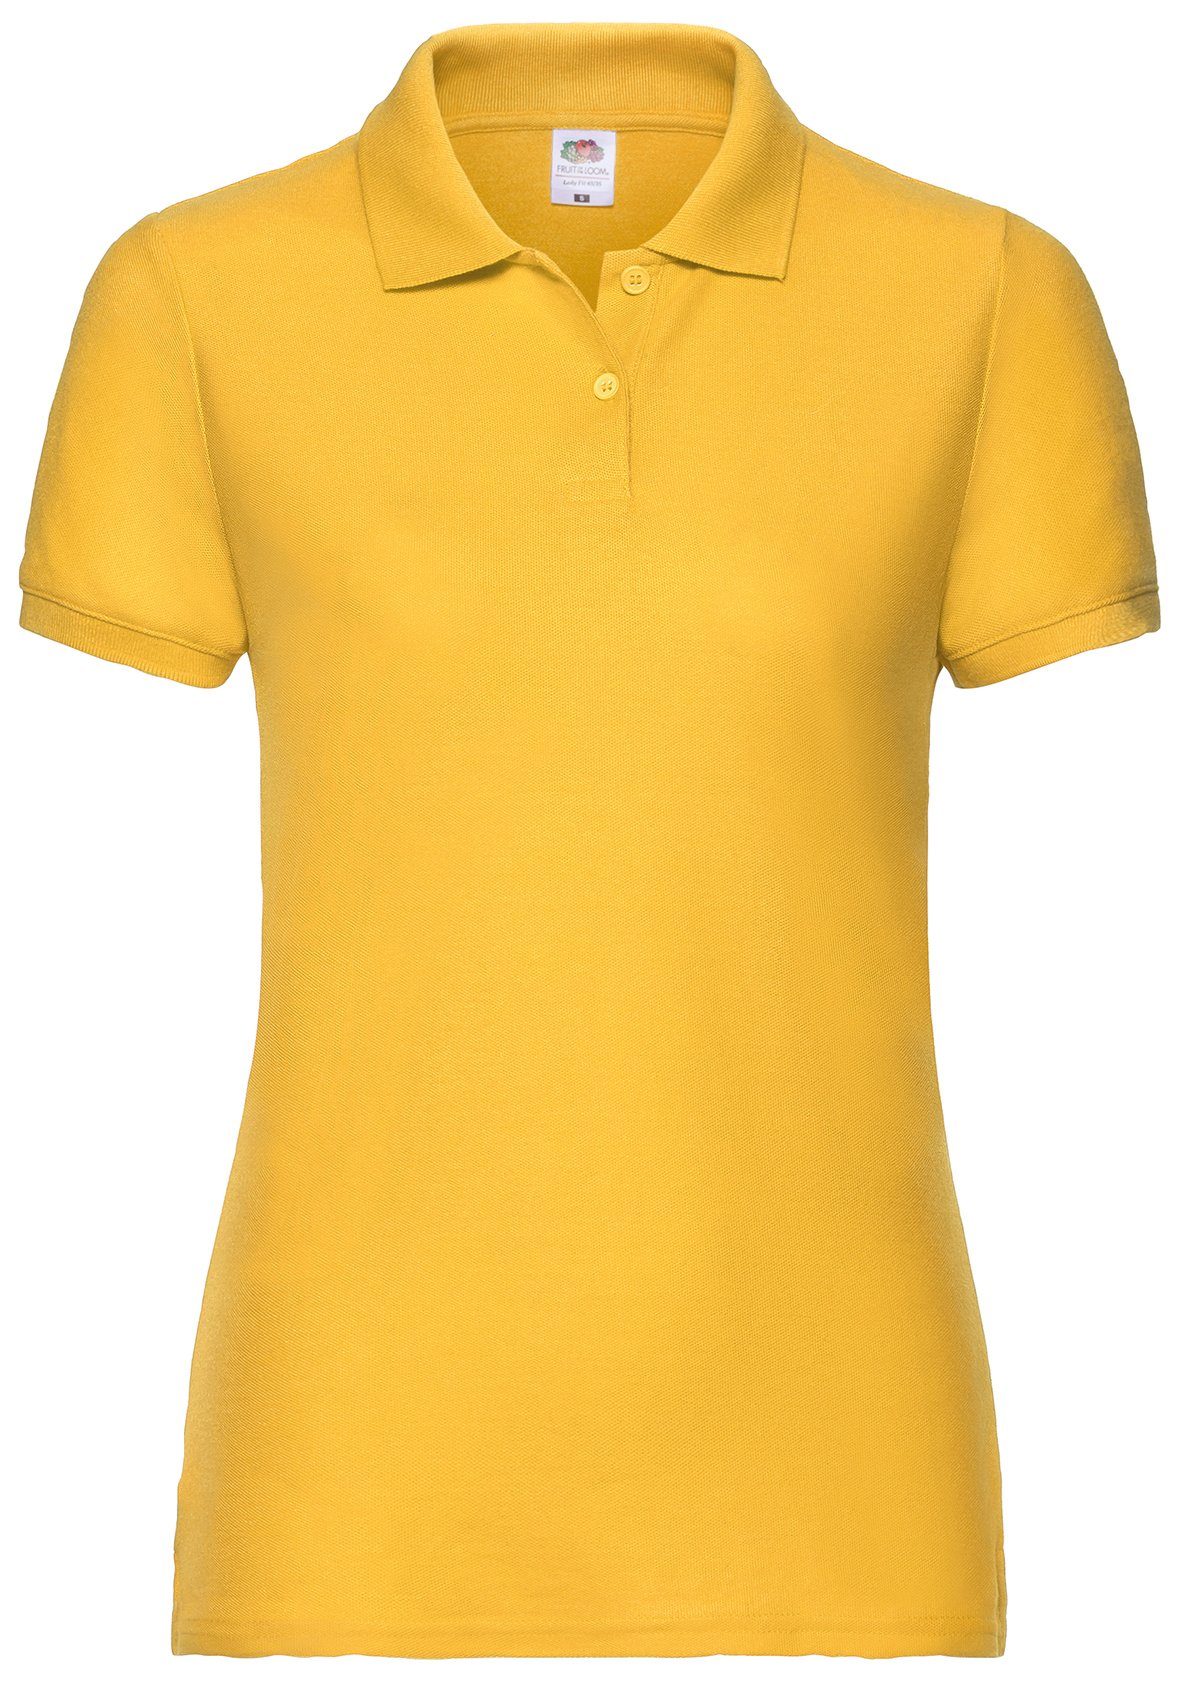 Fruit of the Loom Poloshirt Fruit of the Loom 65/35 Polo Lady-Fit sonnenblumengelb